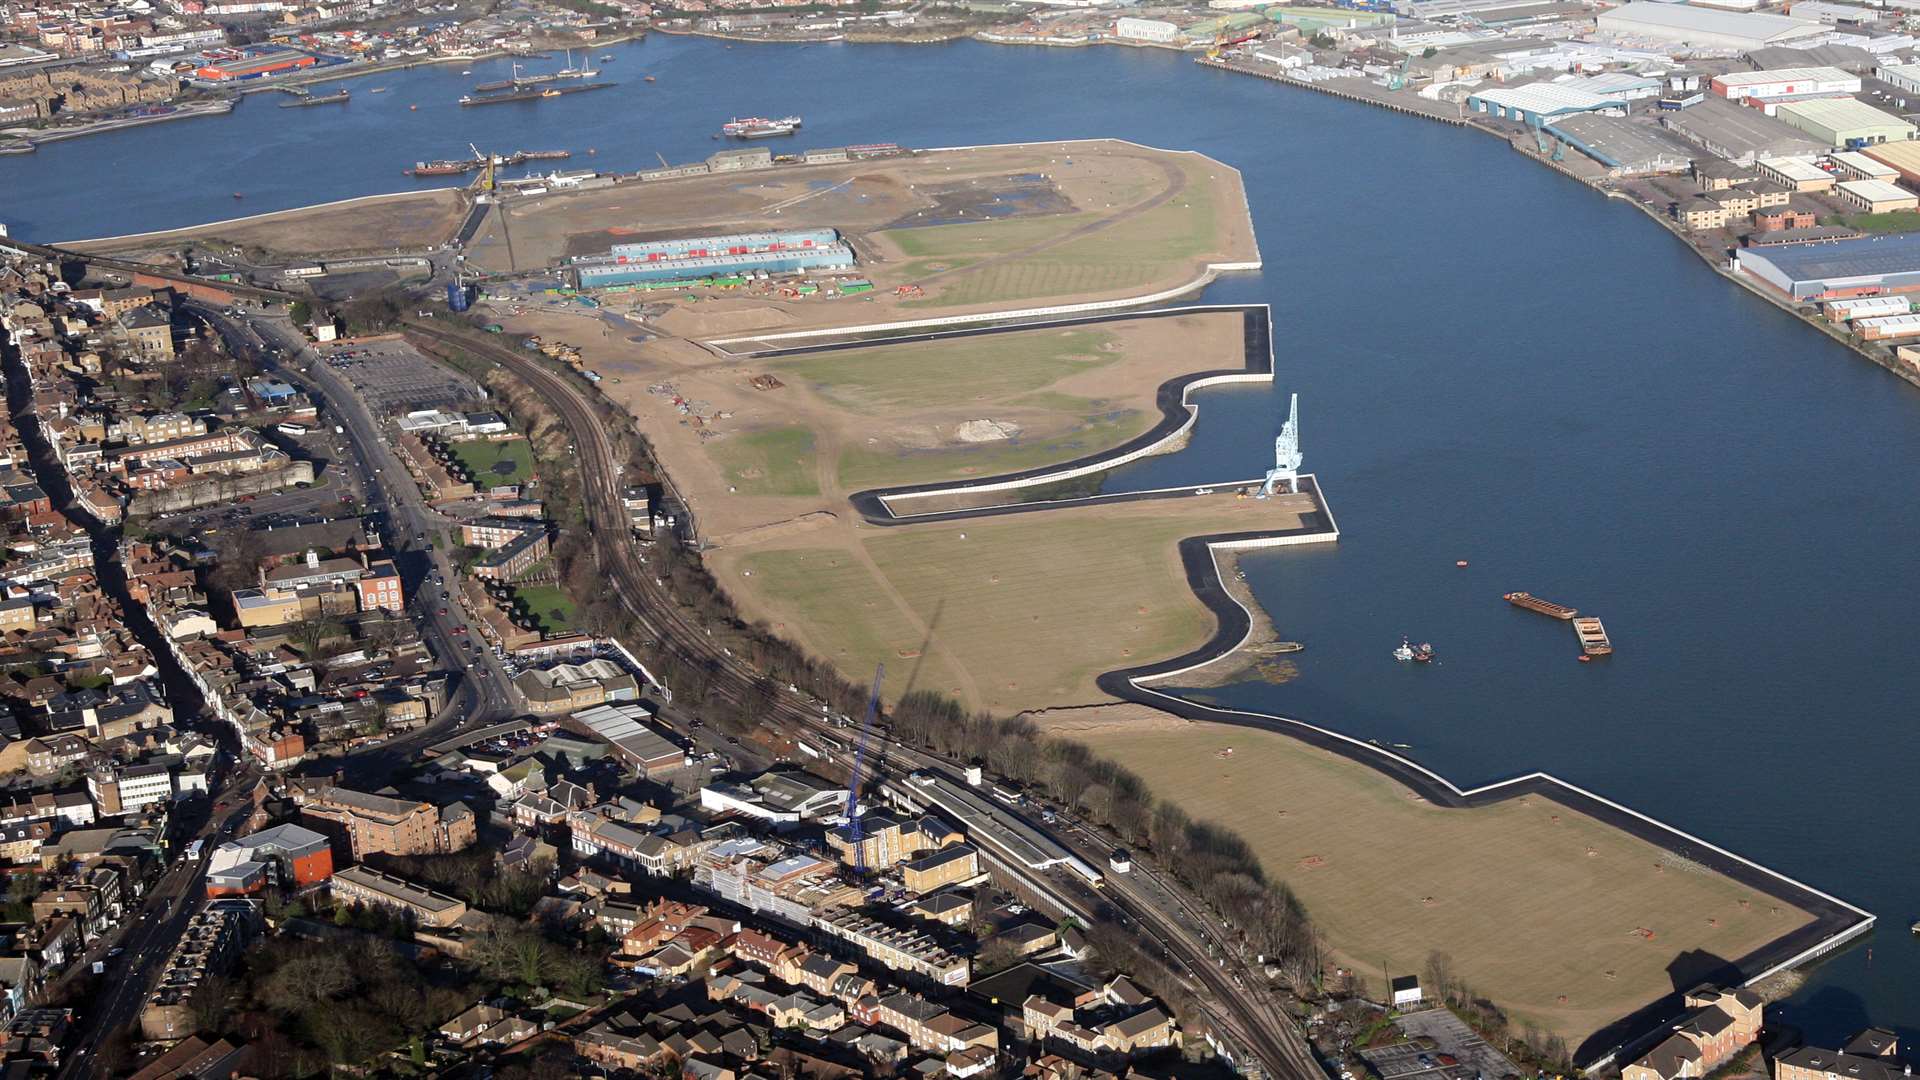 The Rochester Riverside area in 2014 which is being redeveloped